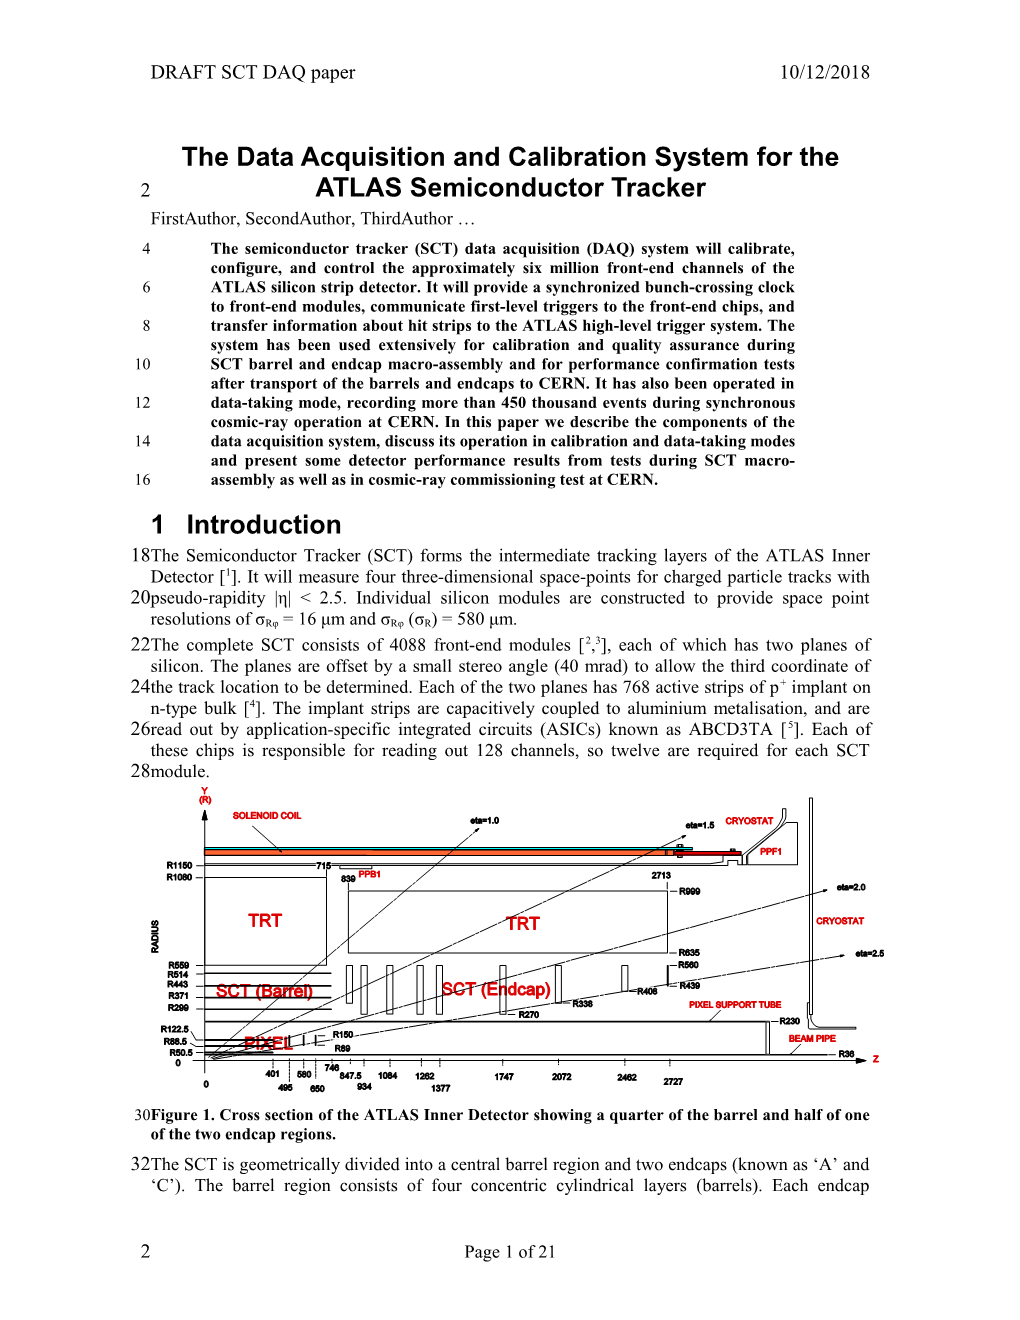 The Data Acquisition and Calibration System for the ATLAS Semiconductor Tracker